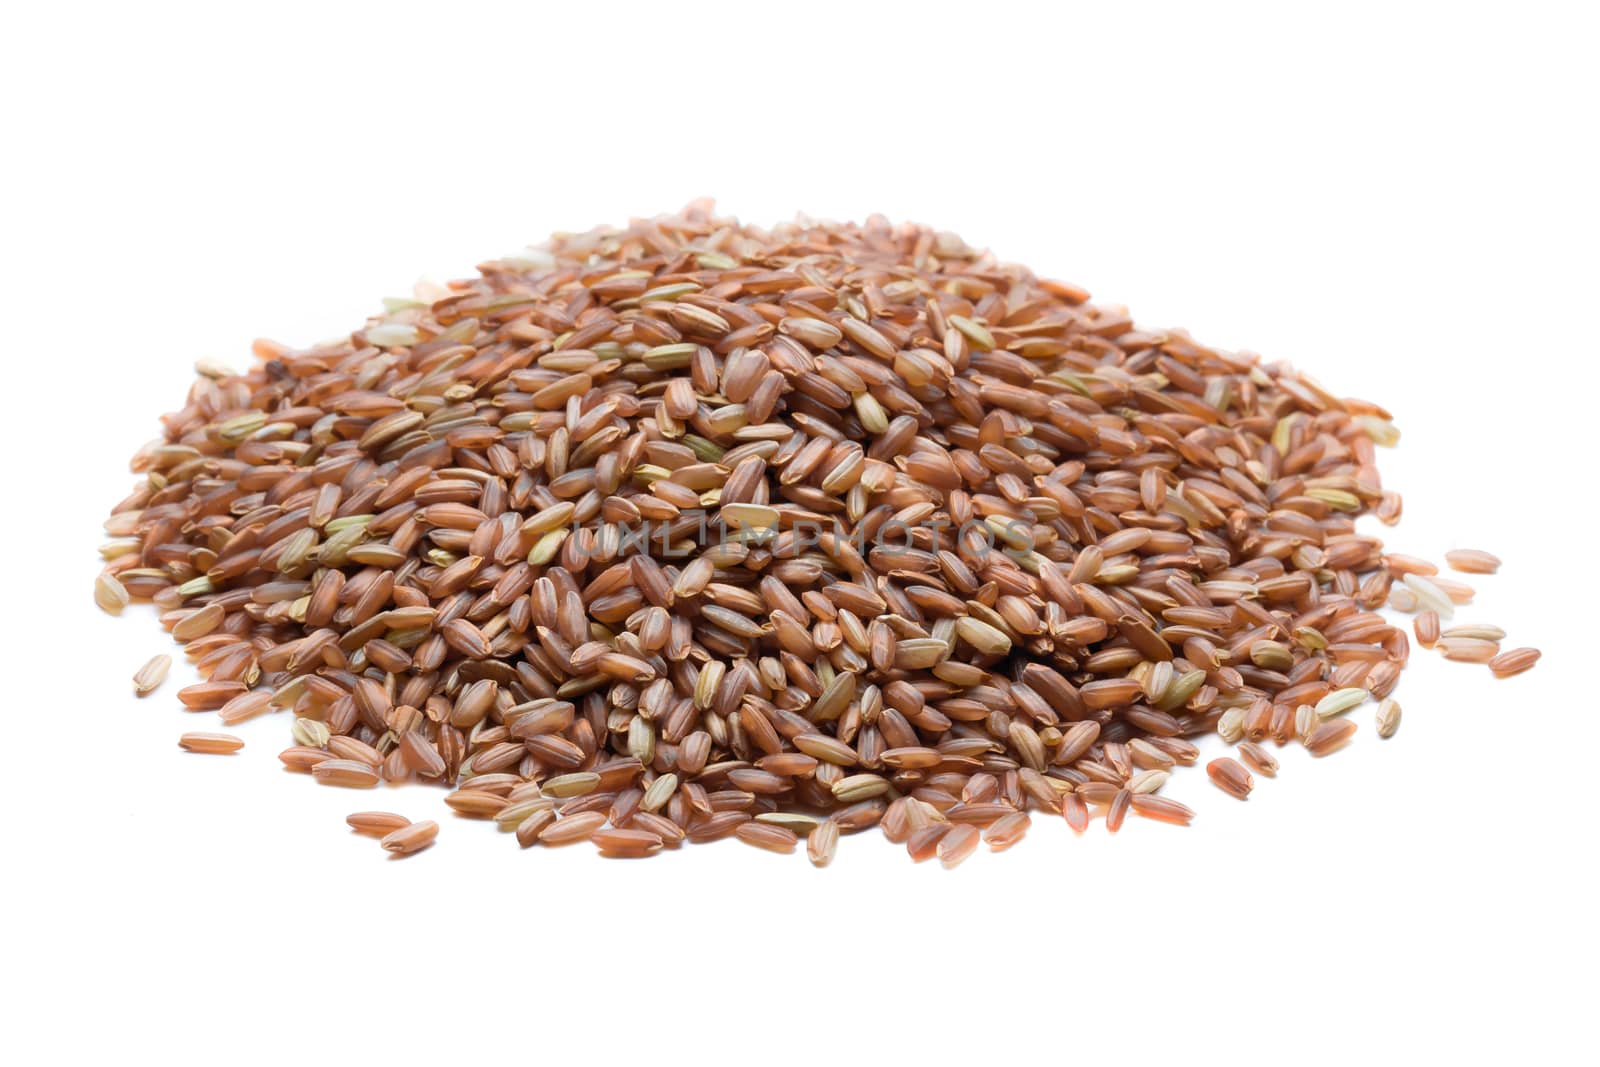 pile of brown rice isolated on white background